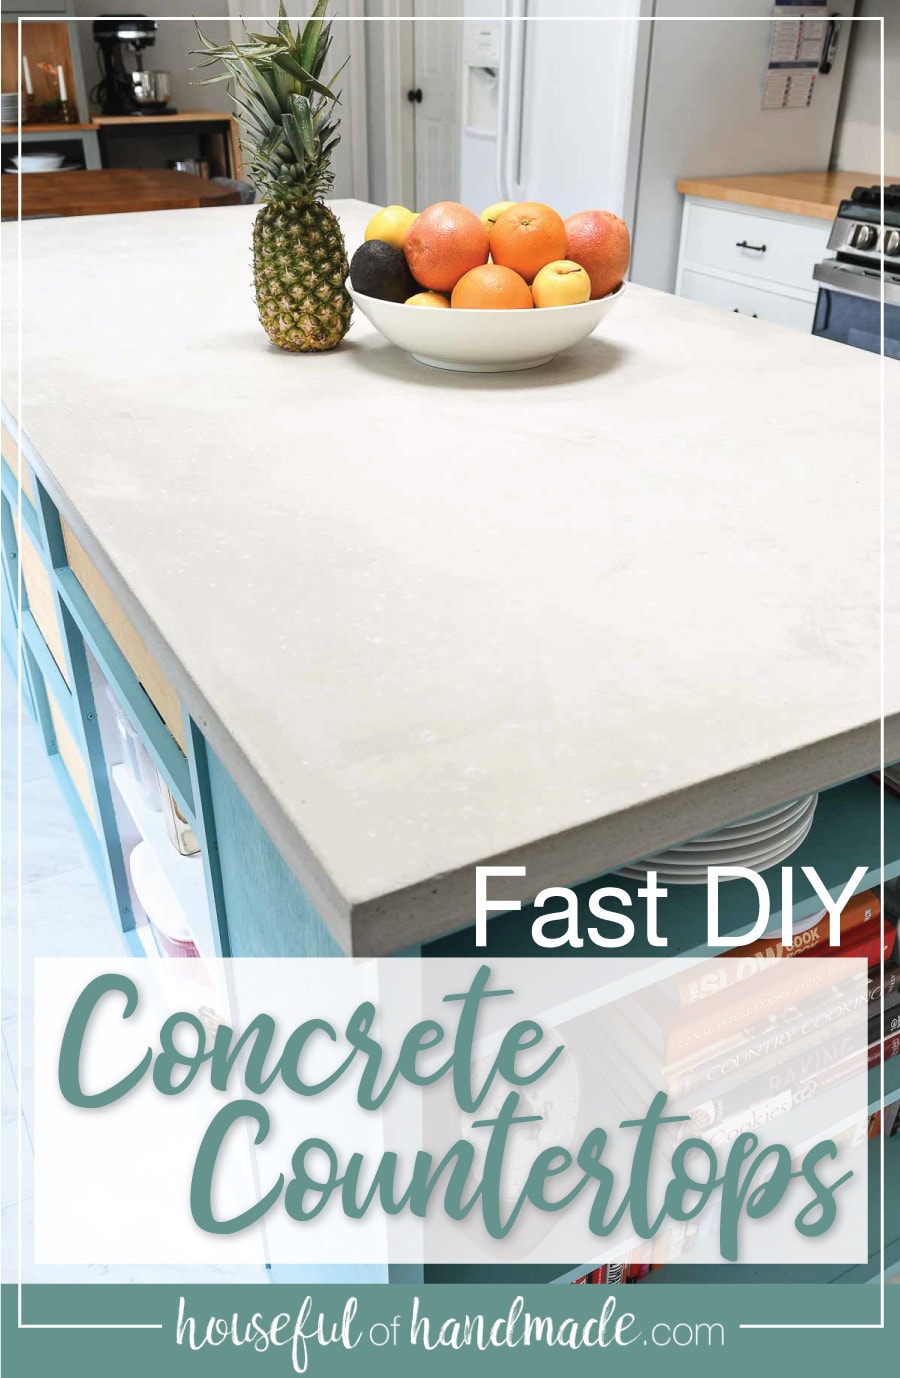 Kitchen island with a gray concrete countertop with a fruit bowl sitting on top and text overlay: Fast DIY concrete countertops.